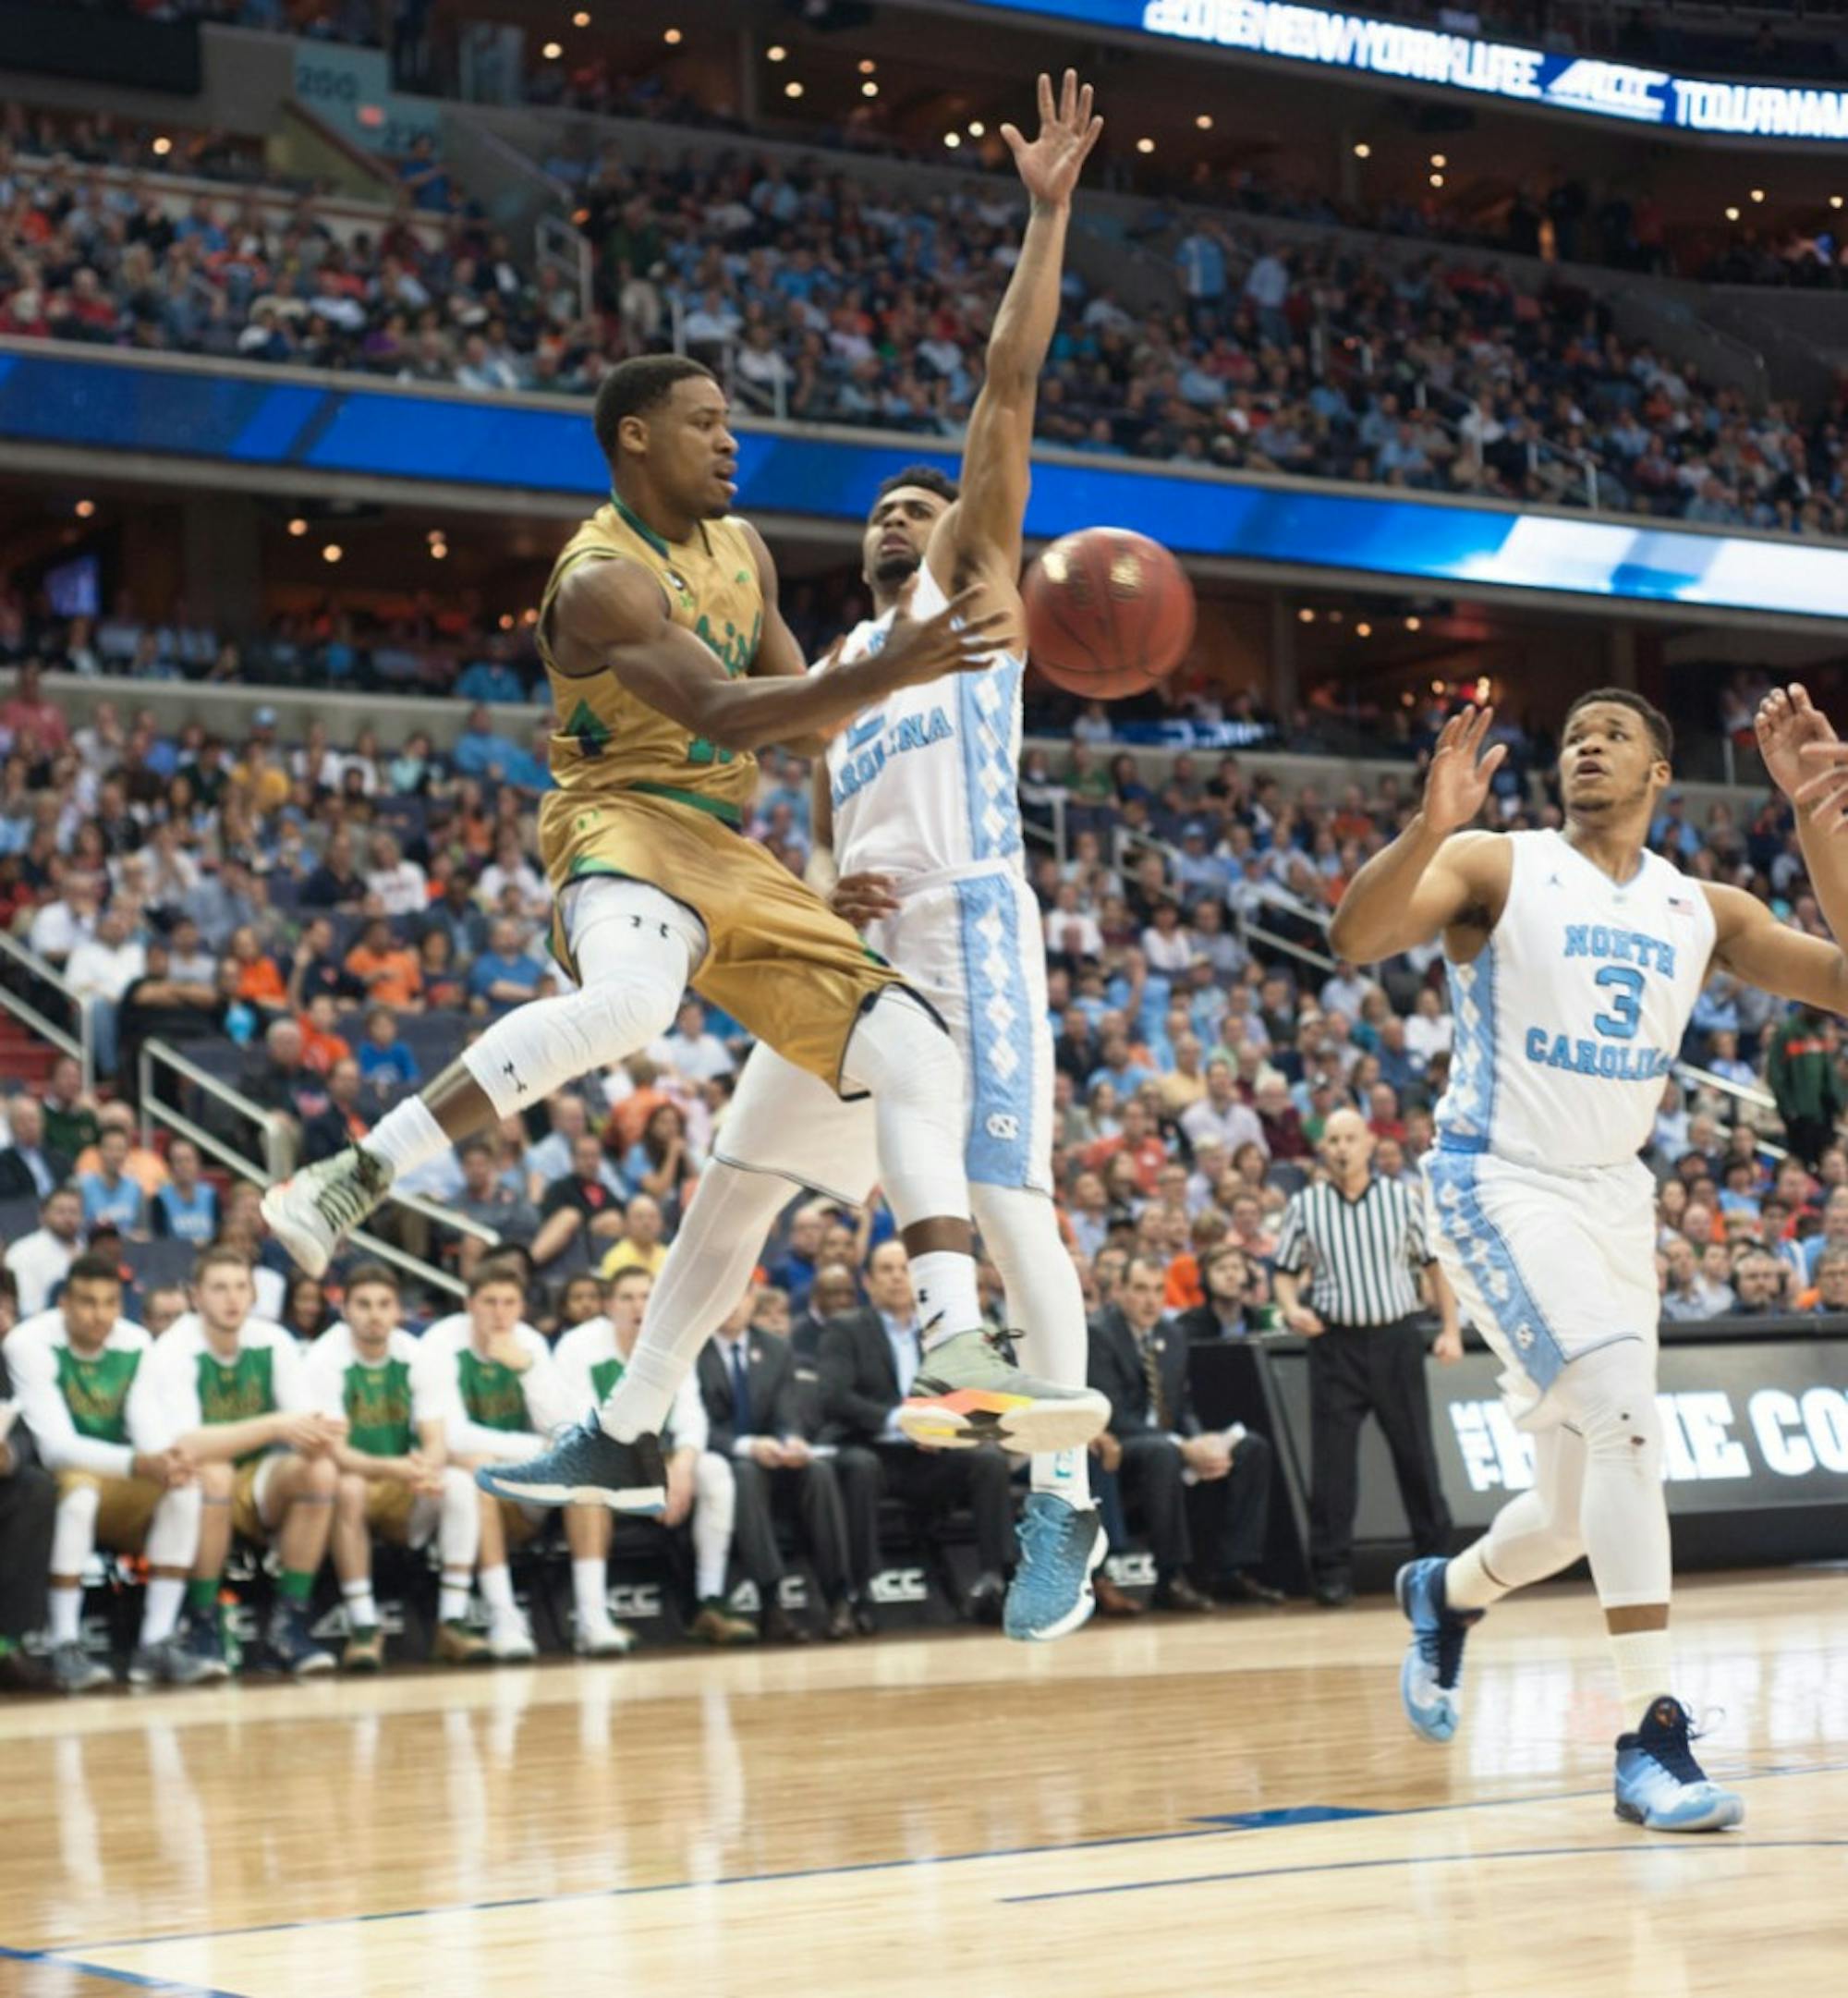 Former Irish junior guard Demetrius Jackson dishes out a pass around a defender during Notre Dame’s 78-47 loss to North Carolina on March 11 at the Verizon Center. Jackson has declared for the NBA Draft.